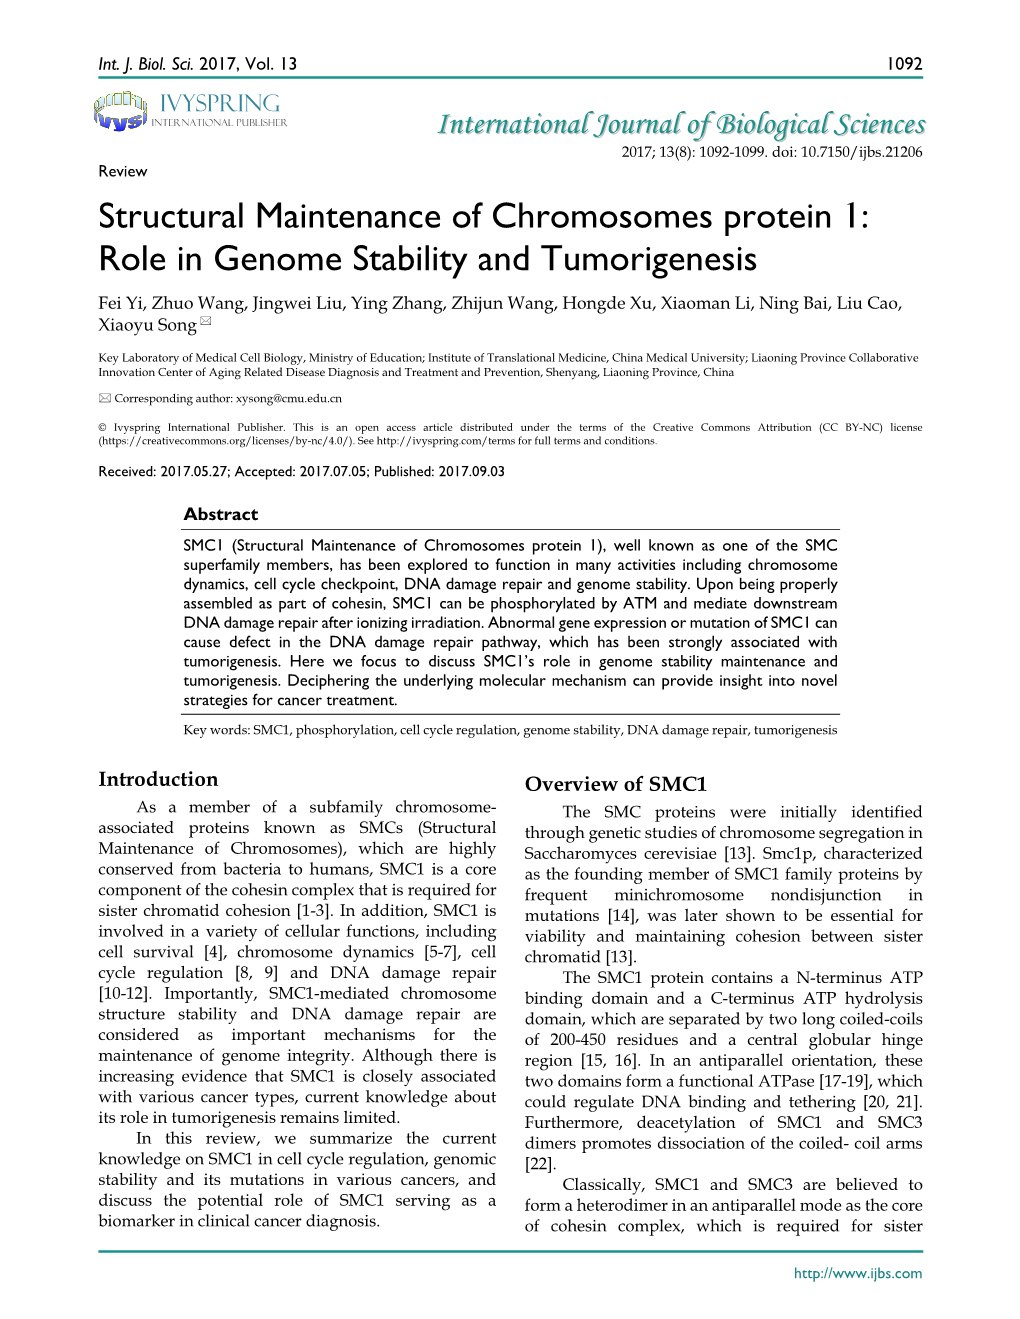 Structural Maintenance of Chromosomes Protein 1